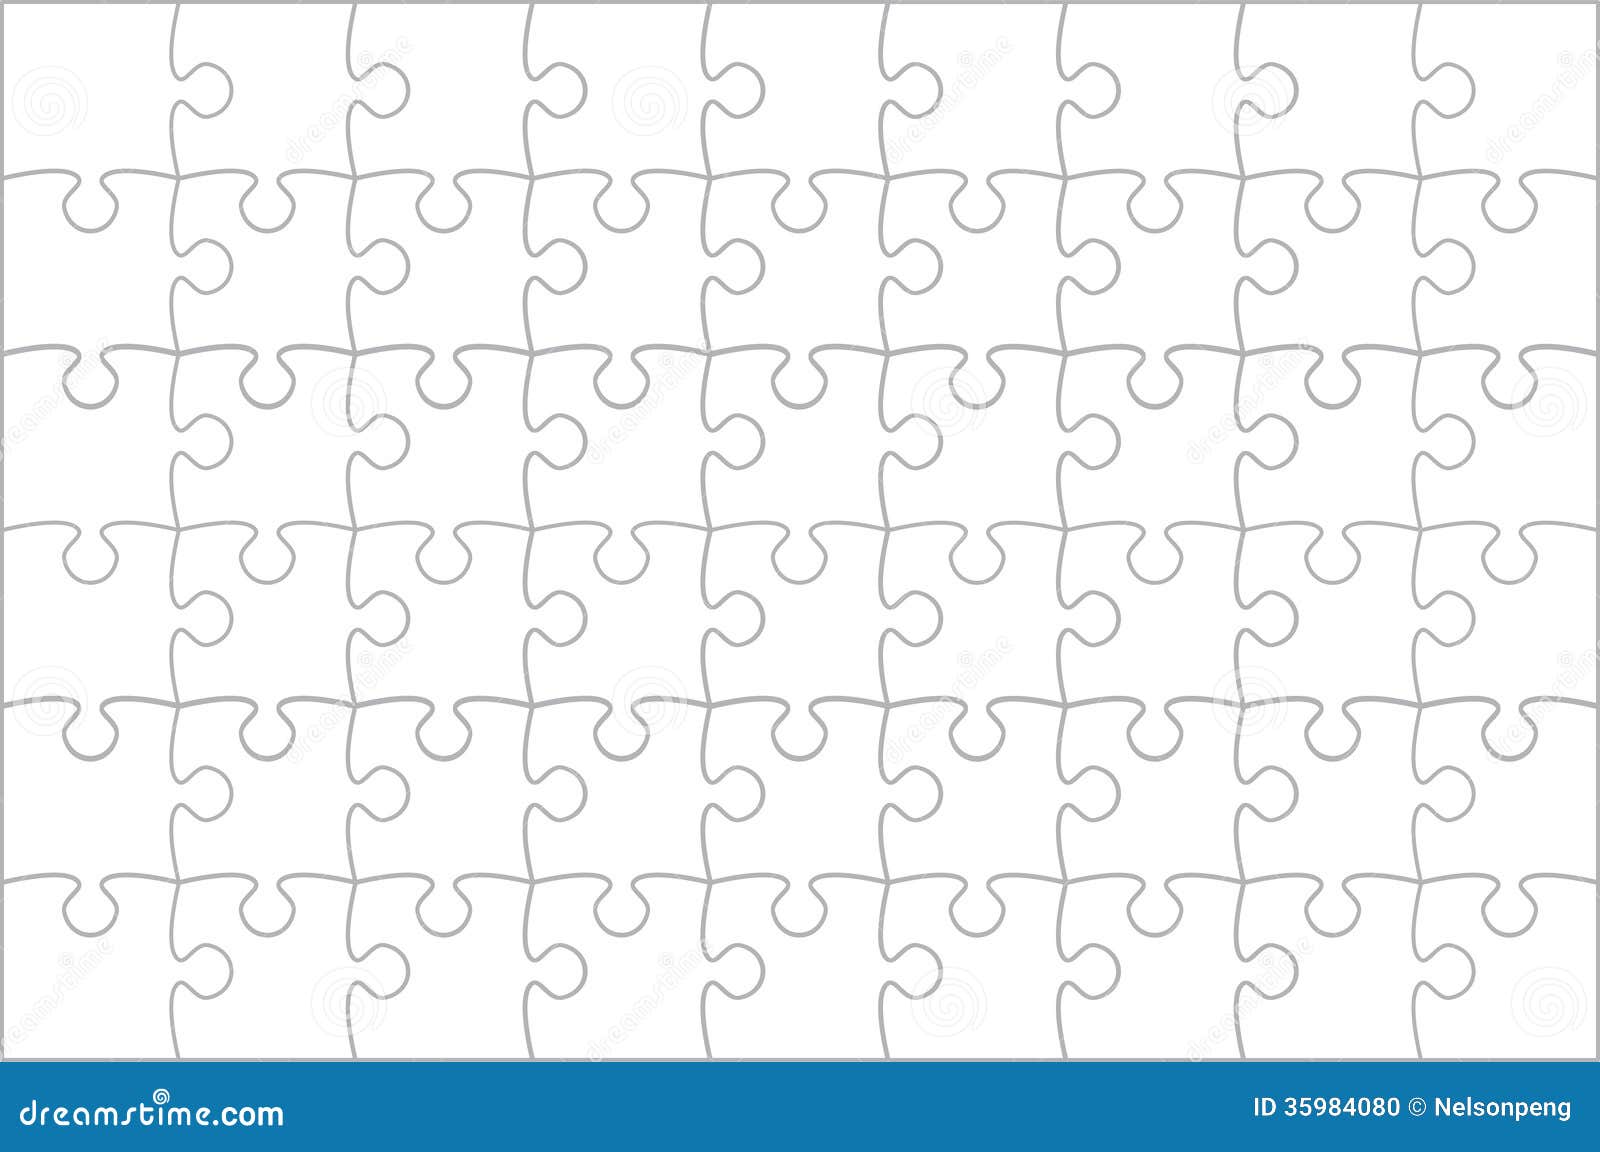 Blank Puzzles Stock Illustrations – 1,877 Blank Puzzles Stock